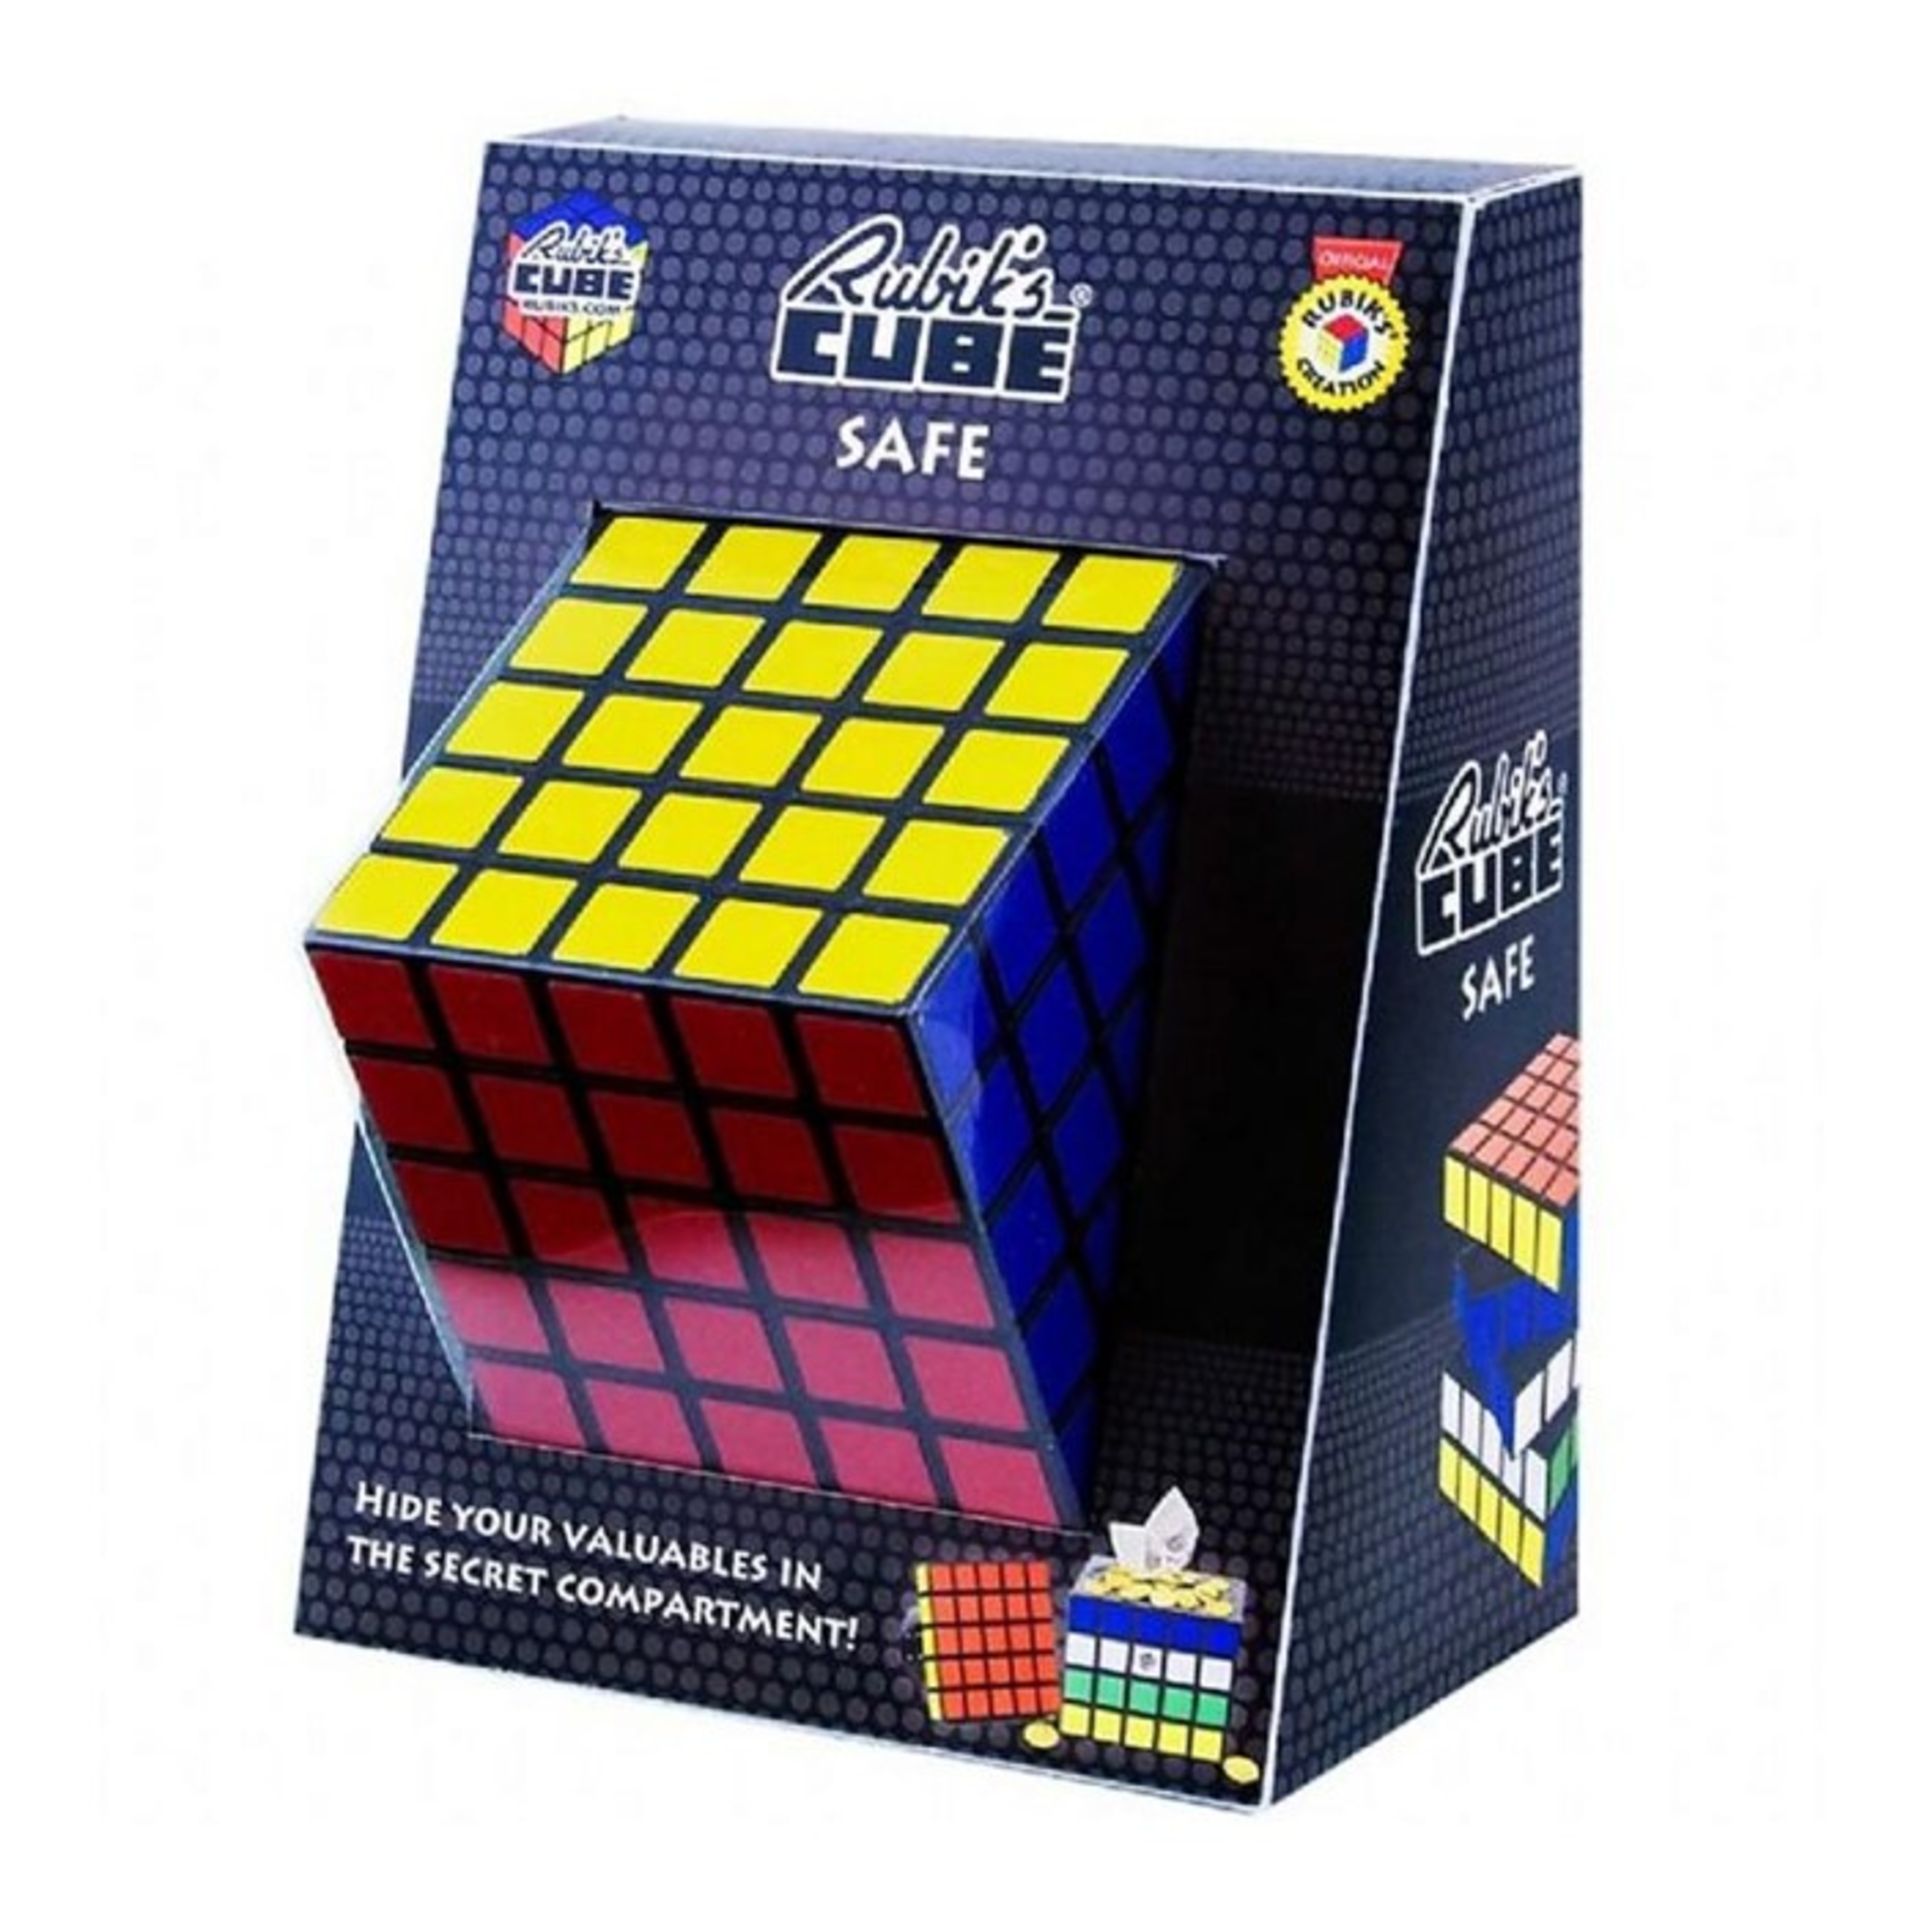 1 BOXED AS NEW RUBIKS CUBE SAFE / PN - NPN / RRP £16.99 (VIEWING HIGHLY RECOMMENDED)